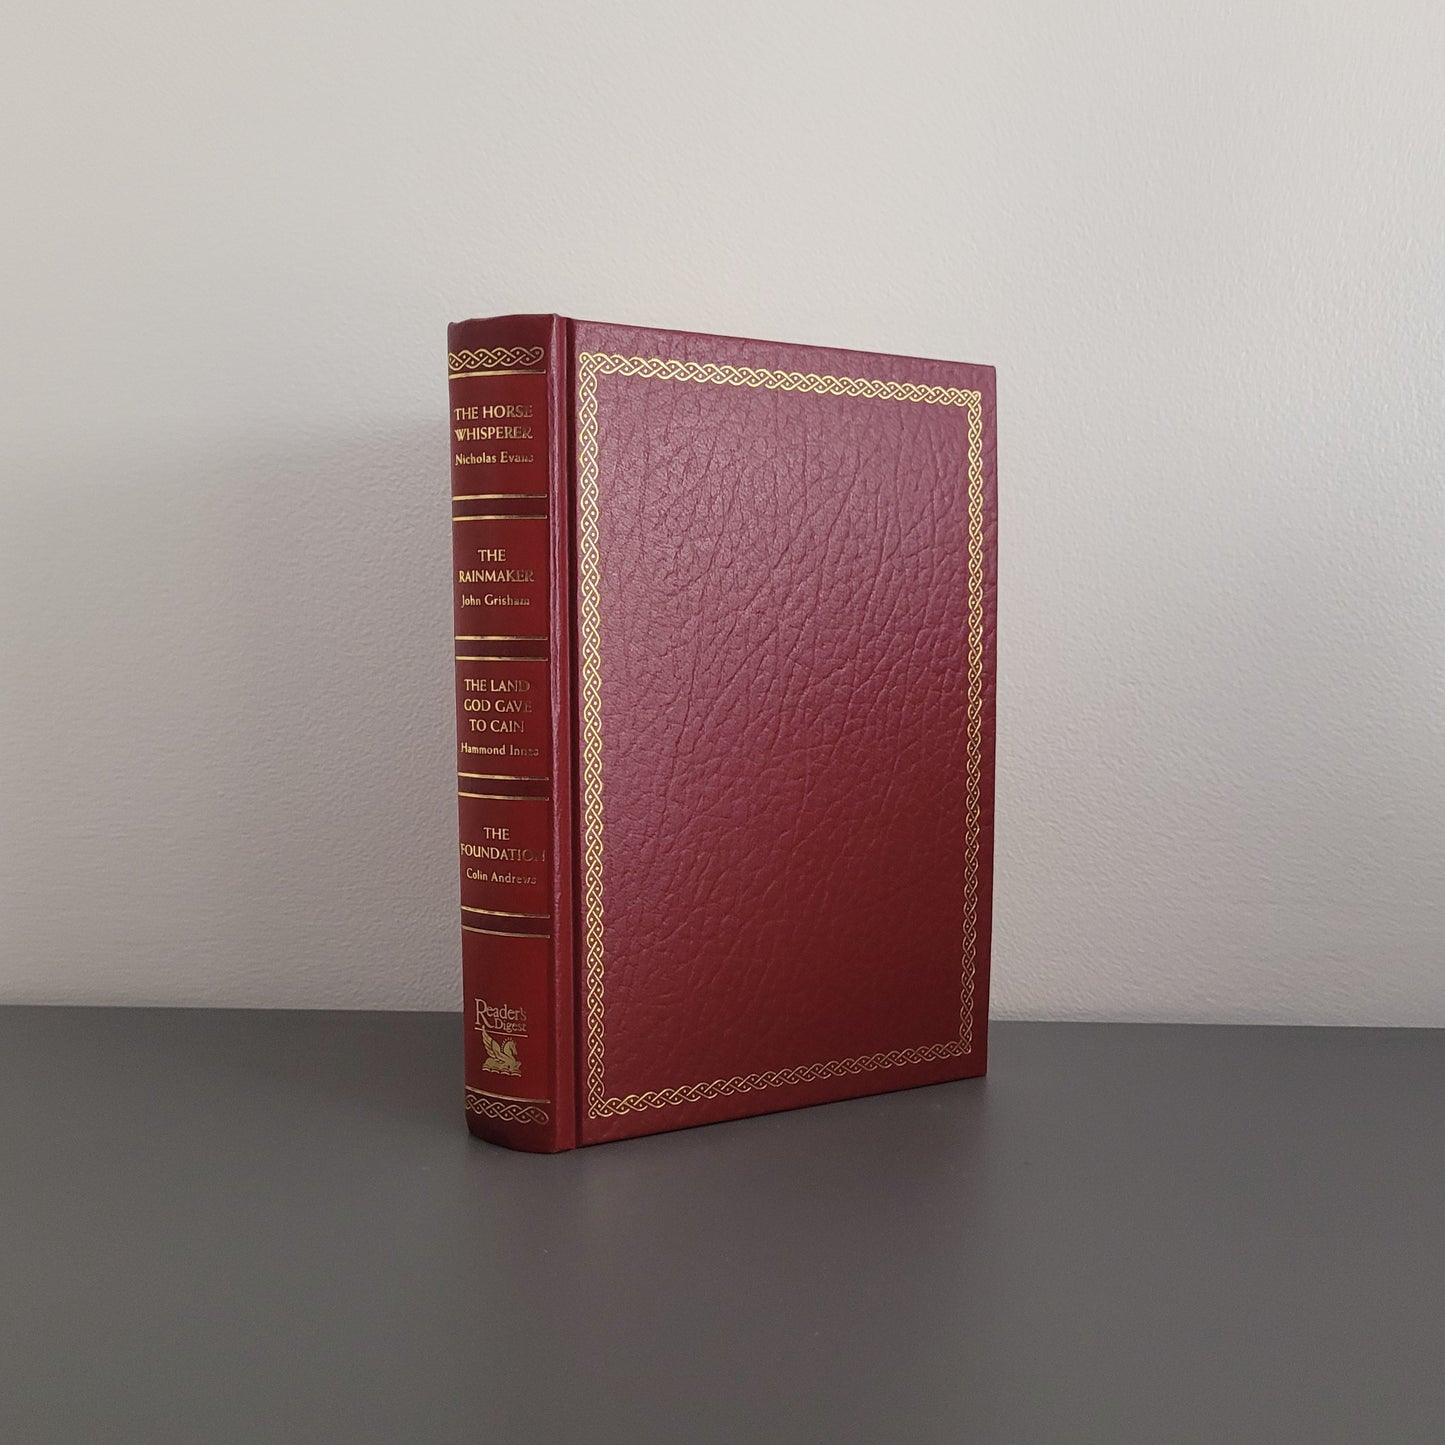 The front of the book fold, showing a red hardback book with a golden border.